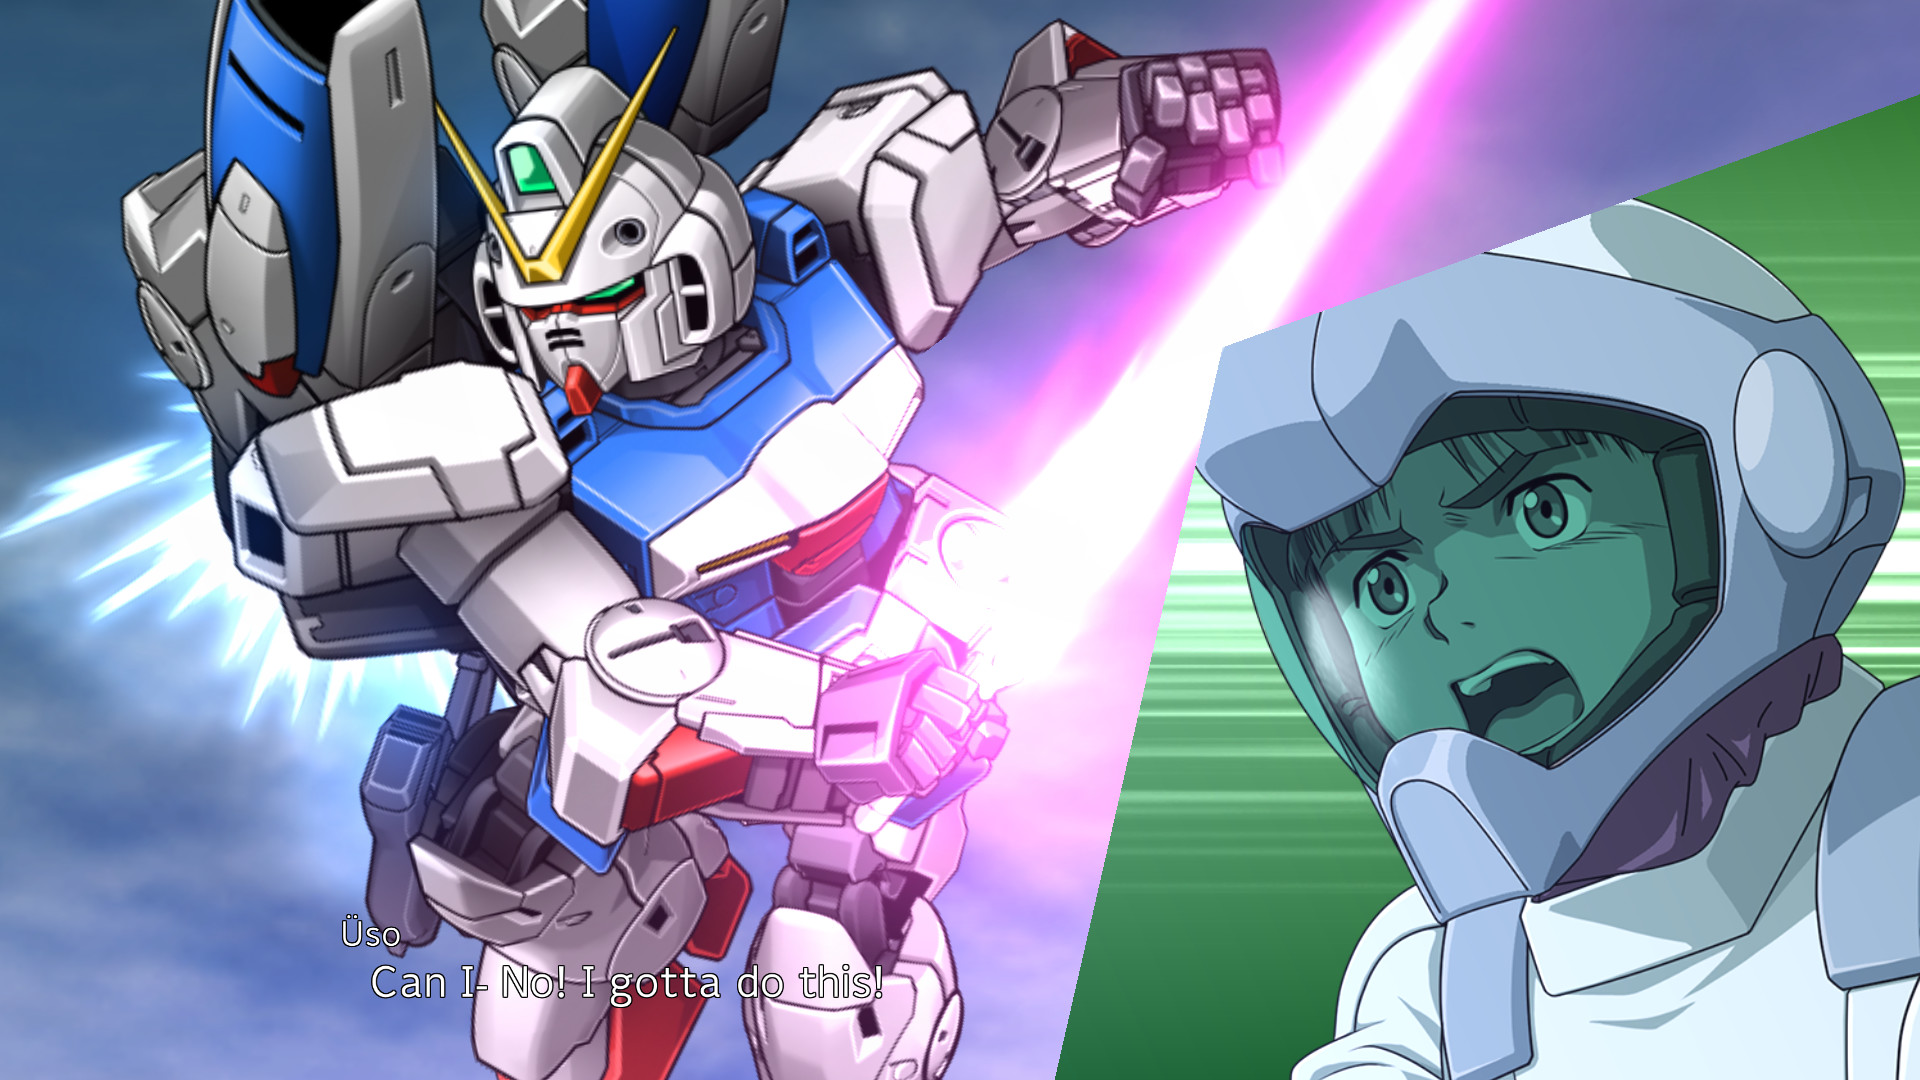 Anime strategy RPG Super Robot Wars 30 is mech-ing waves on Steam